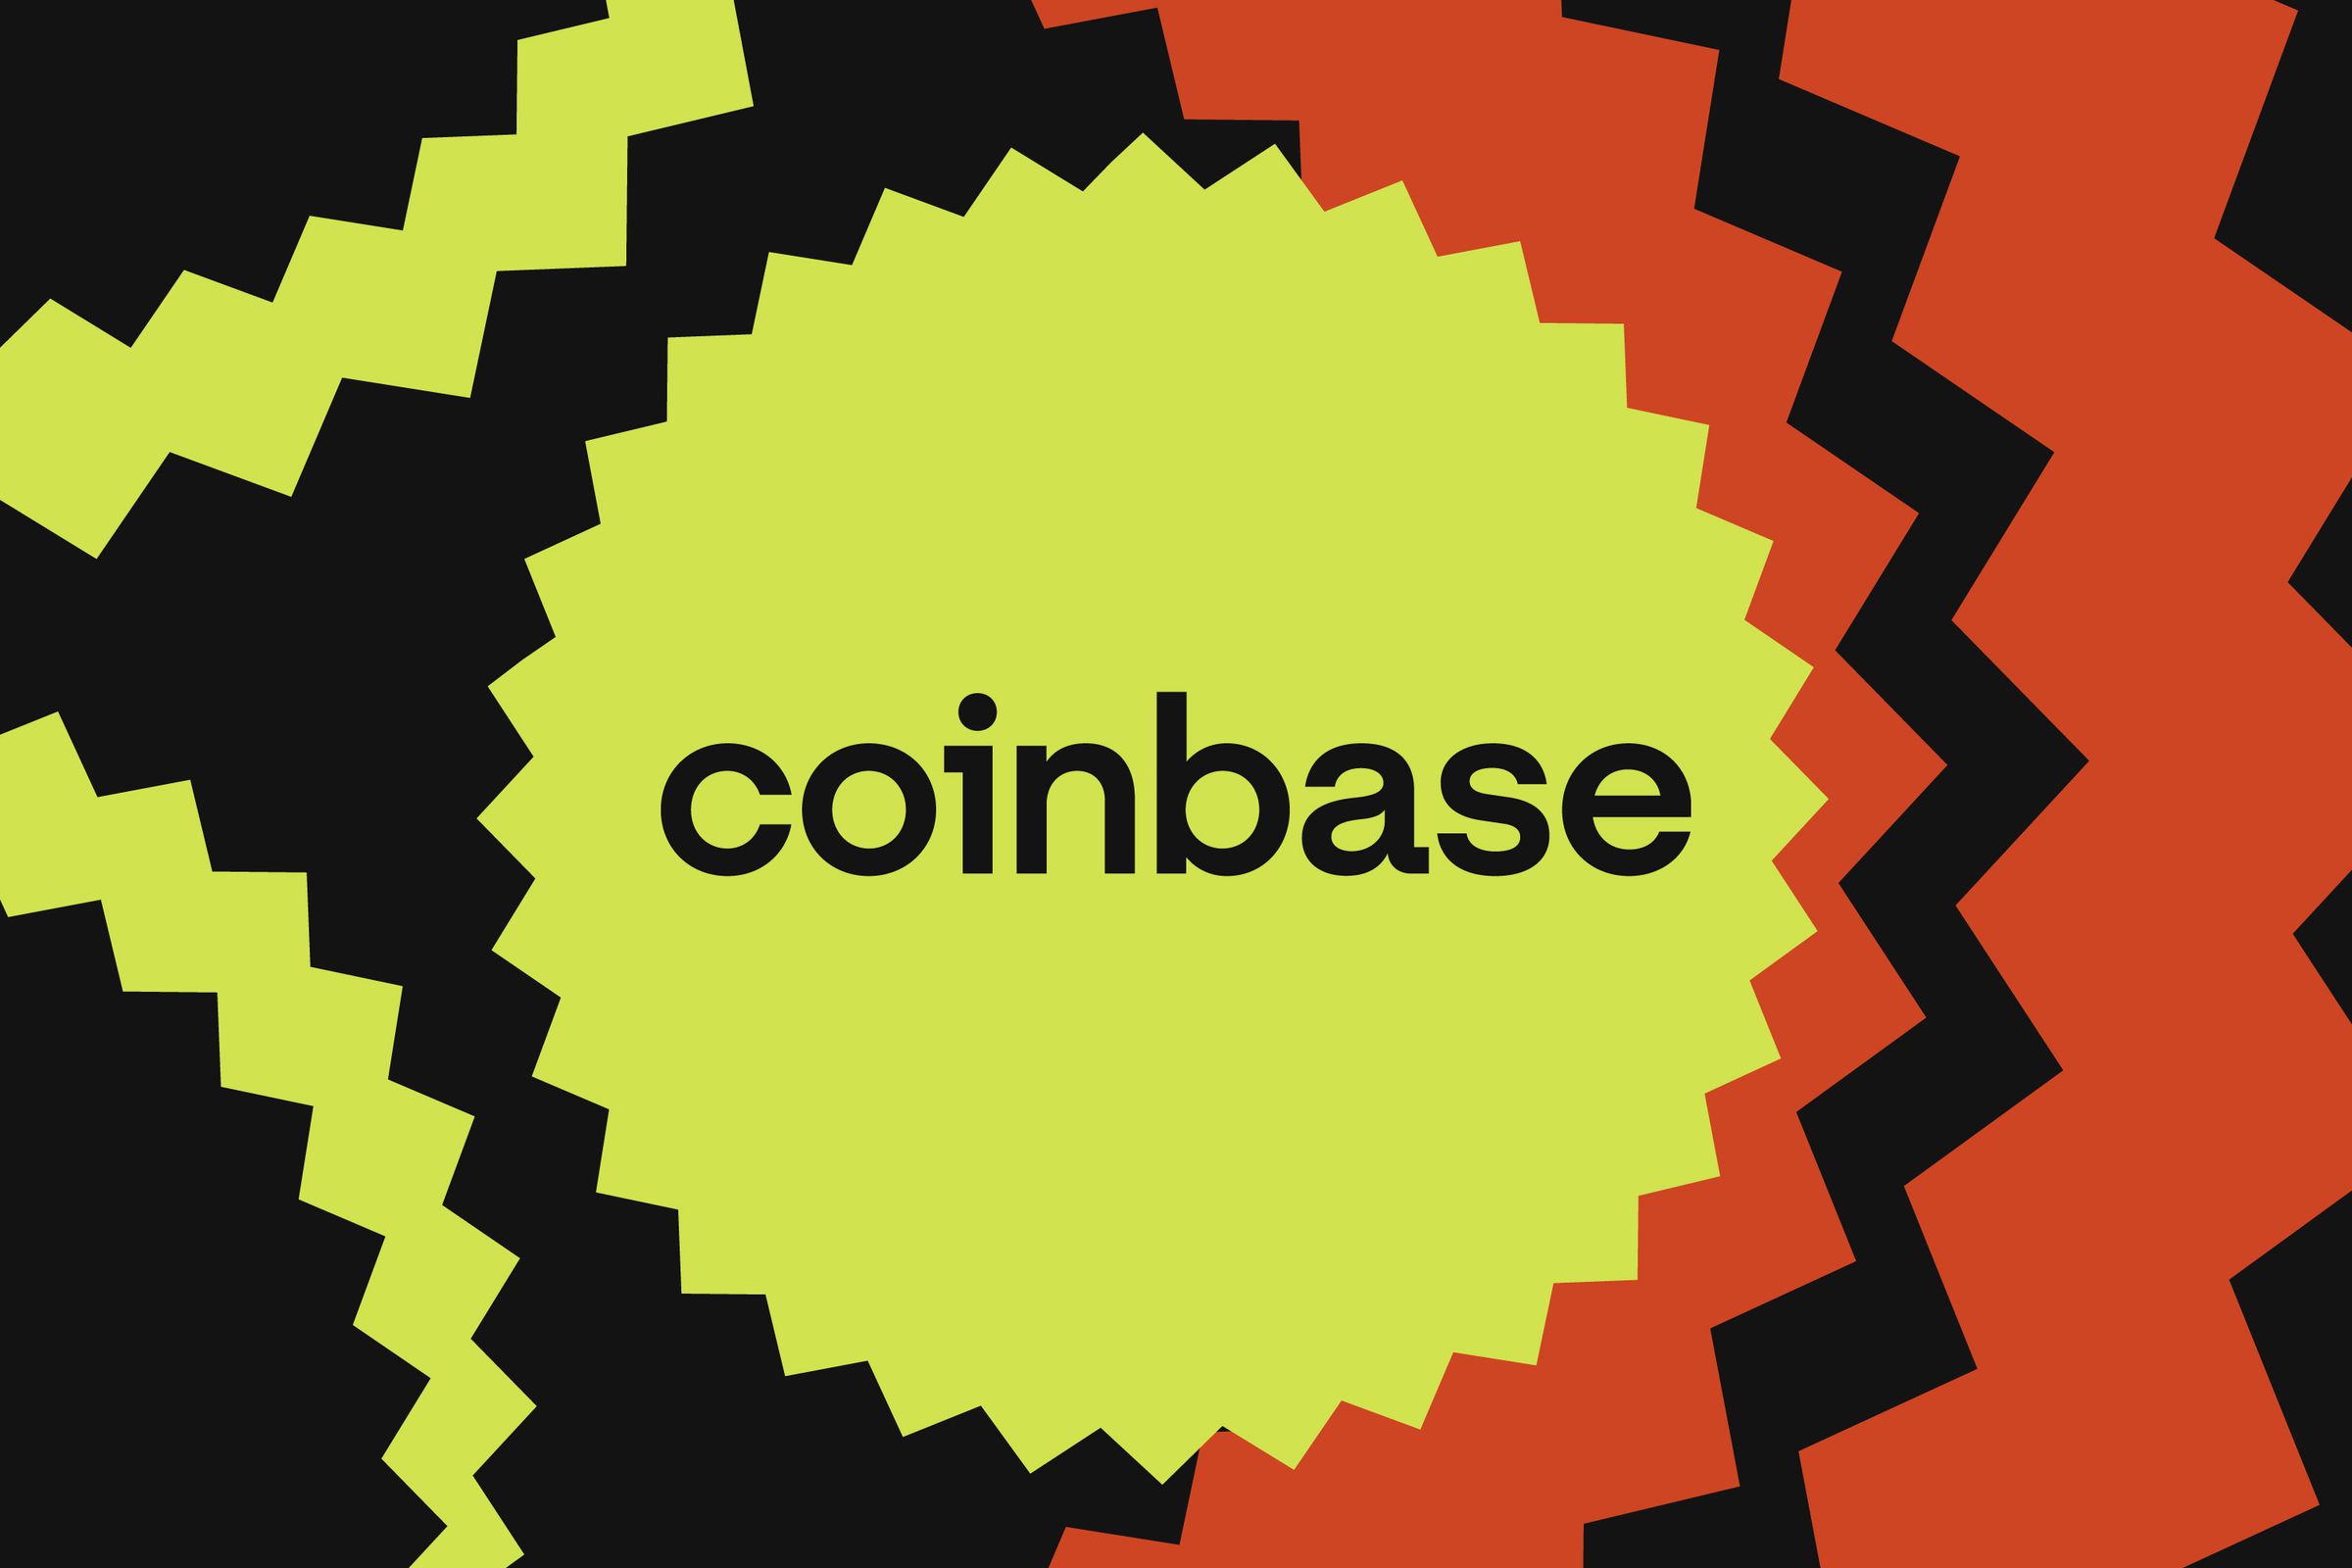 Coinbase’s logo on an abstract background